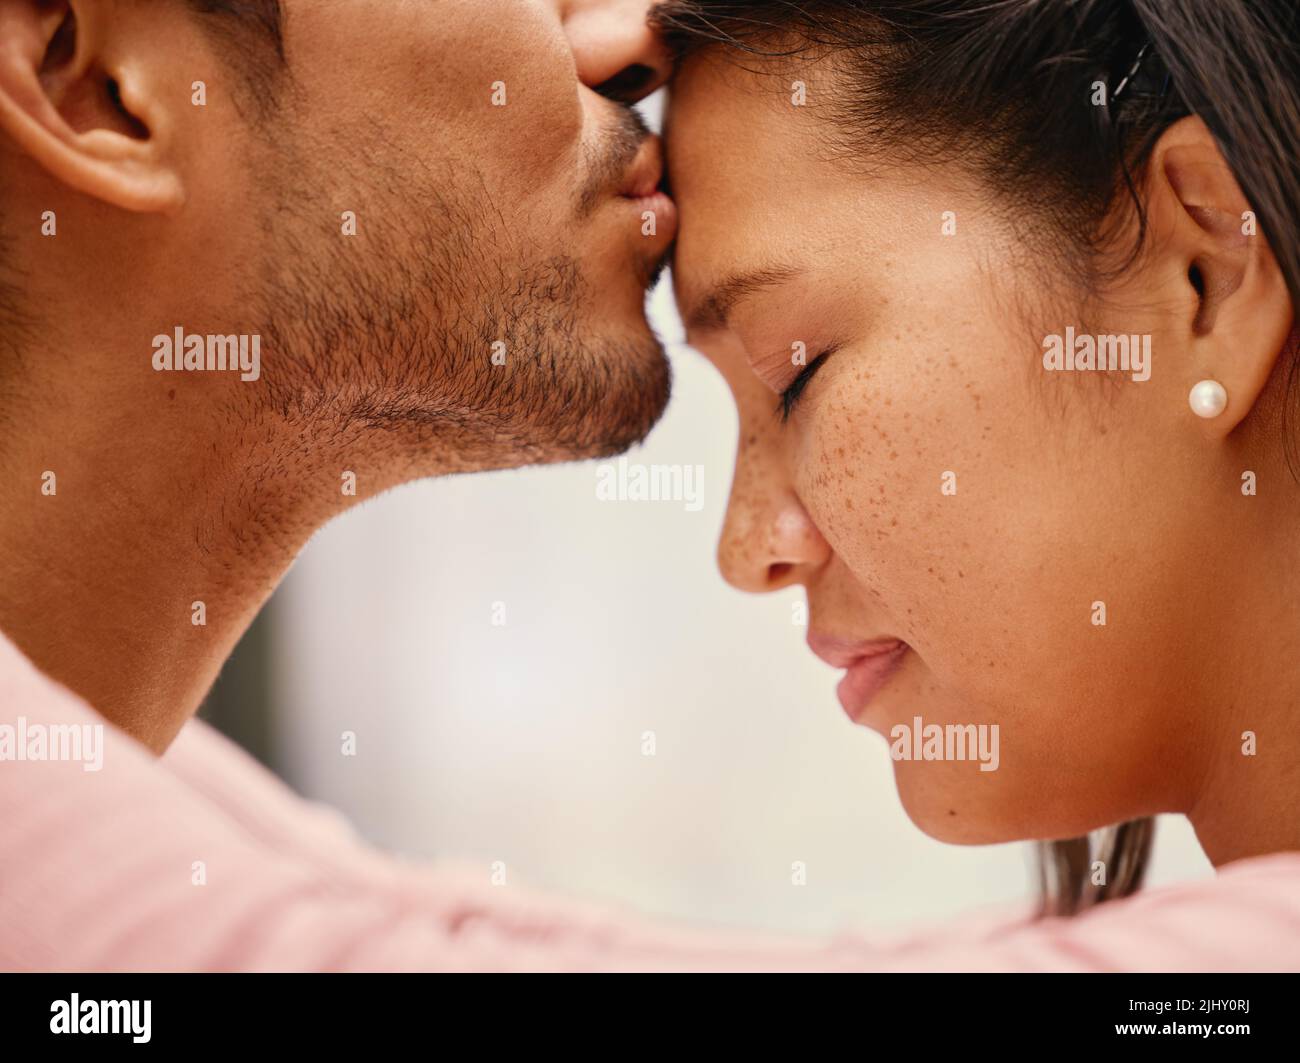 Closeup of mixed race man kissing his girlfriends forehead. Headshot of hispanic couple bonding and sharing an intimate moment at home. Beautiful Stock Photo